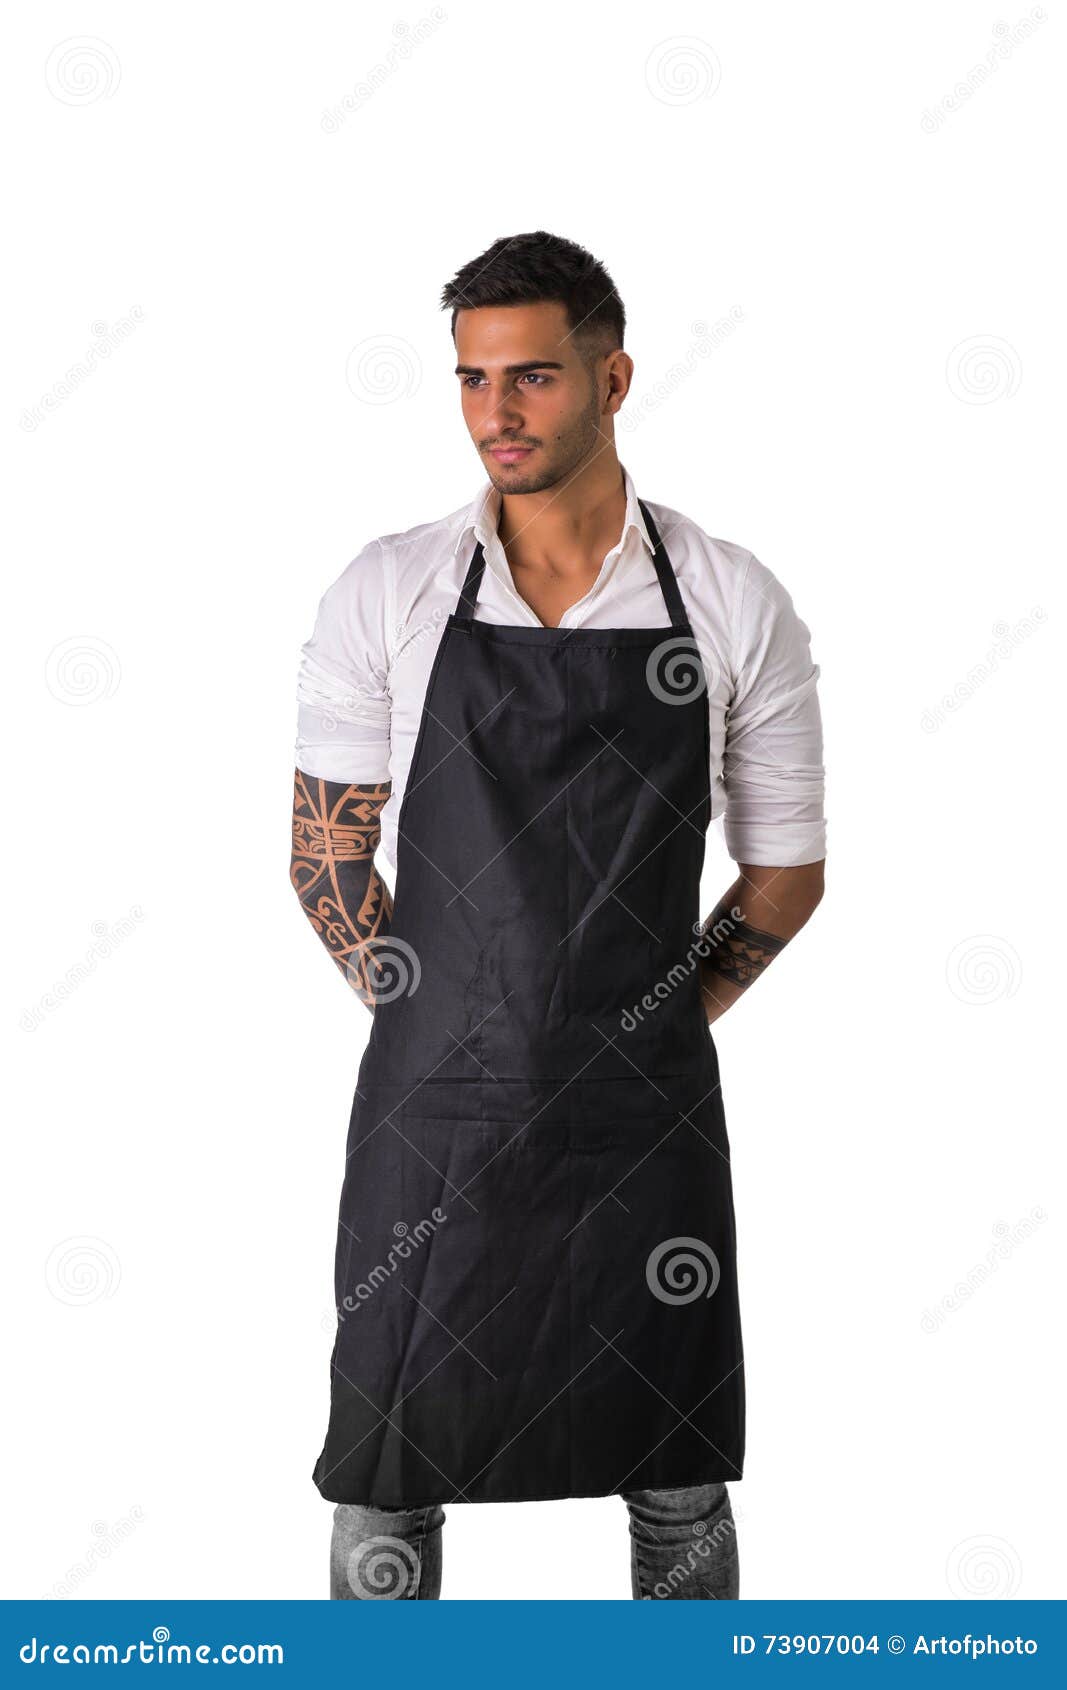 young chef or waiter wearing black apron